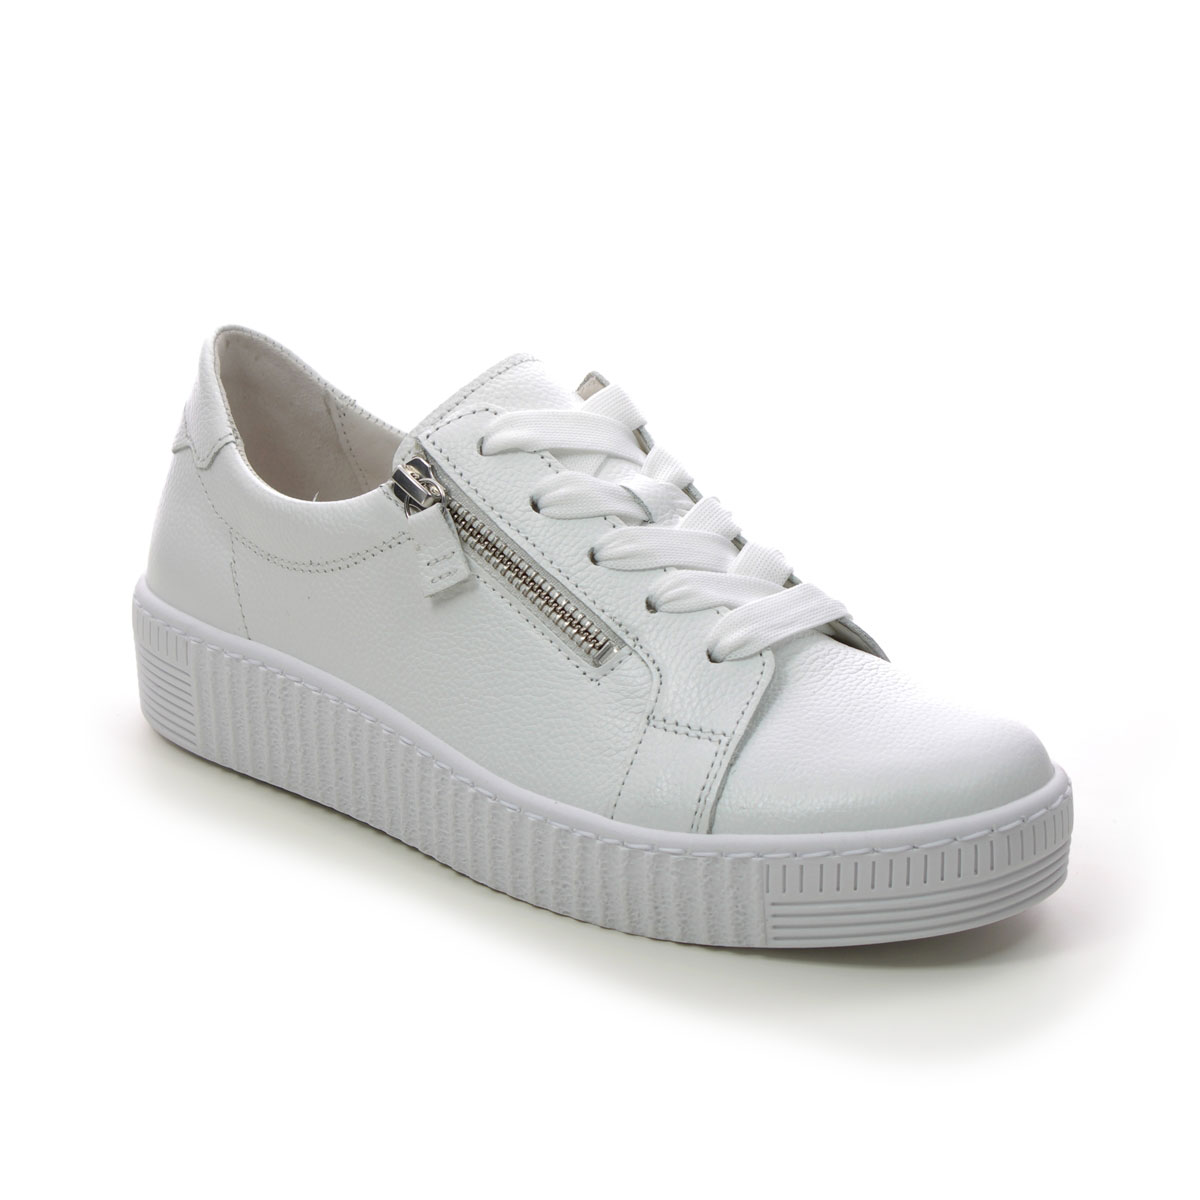 Gabor Wisdom White Leather Womens Trainers 23.334.21 In Size 4 In Plain White Leather  Womens Trainers In Soft White Leather Leather